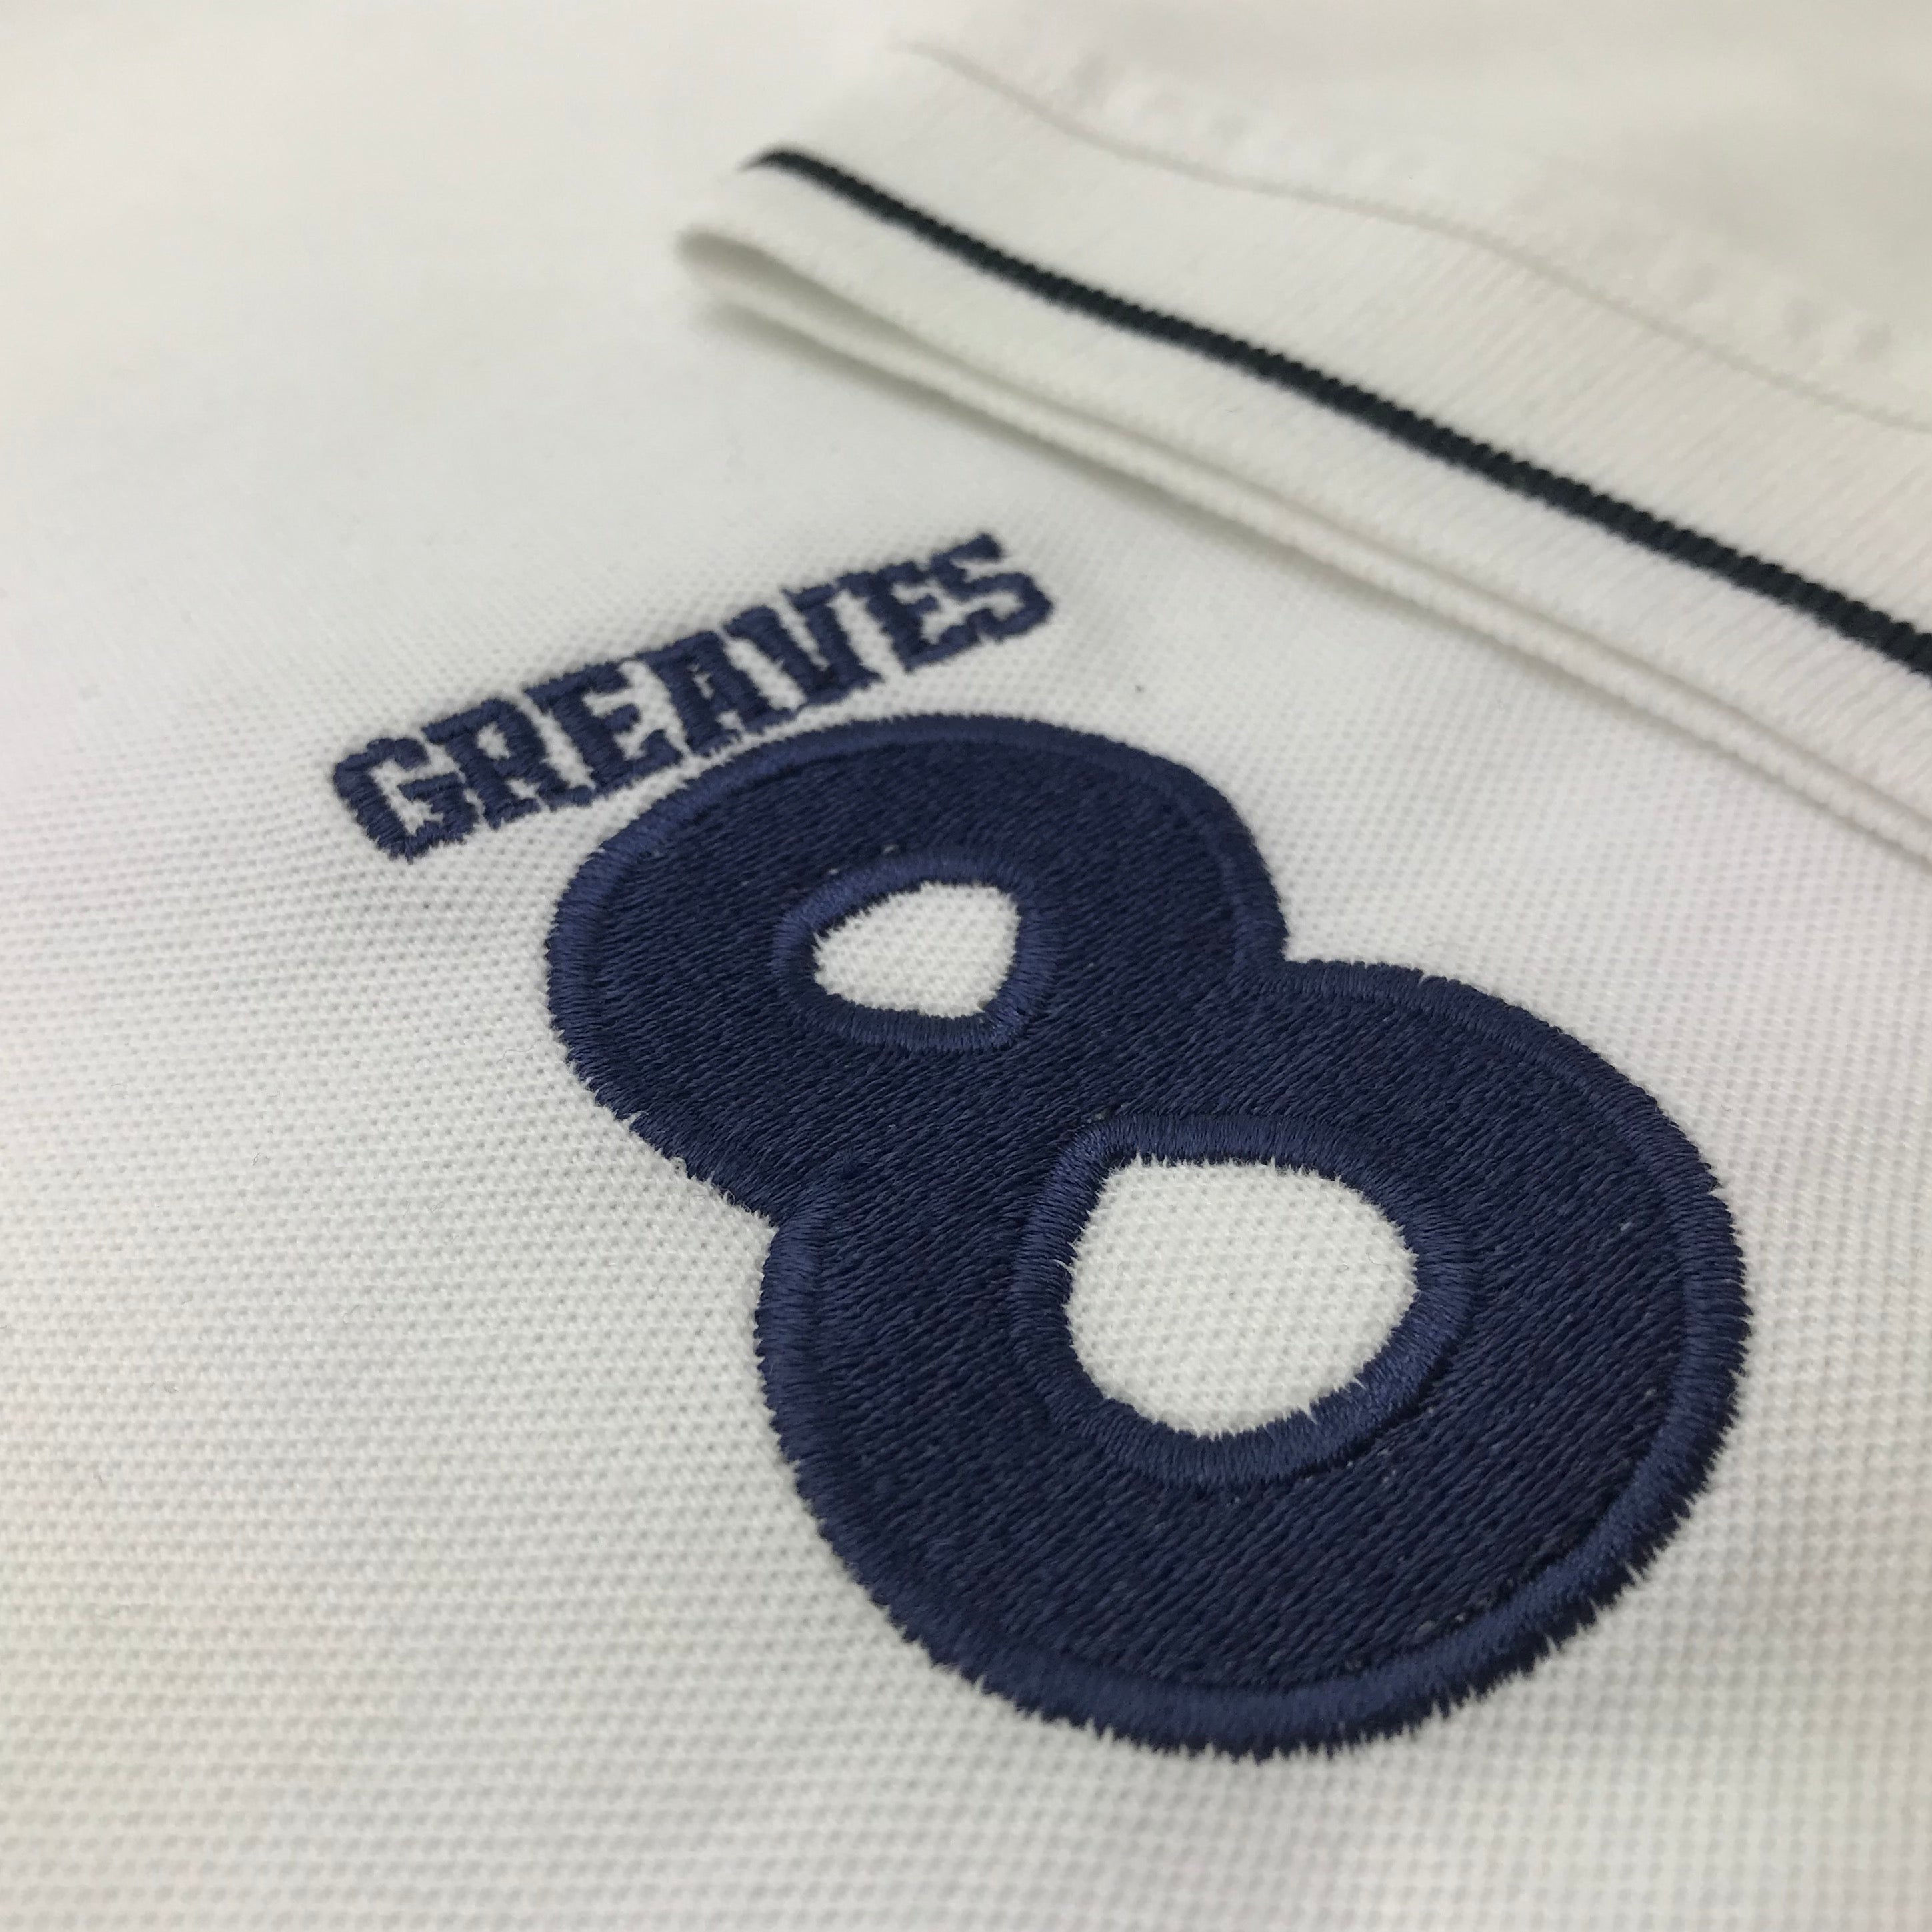 Jimmy Greaves Shirt | Embroidered Tottenham Football Shirts for Sale ...